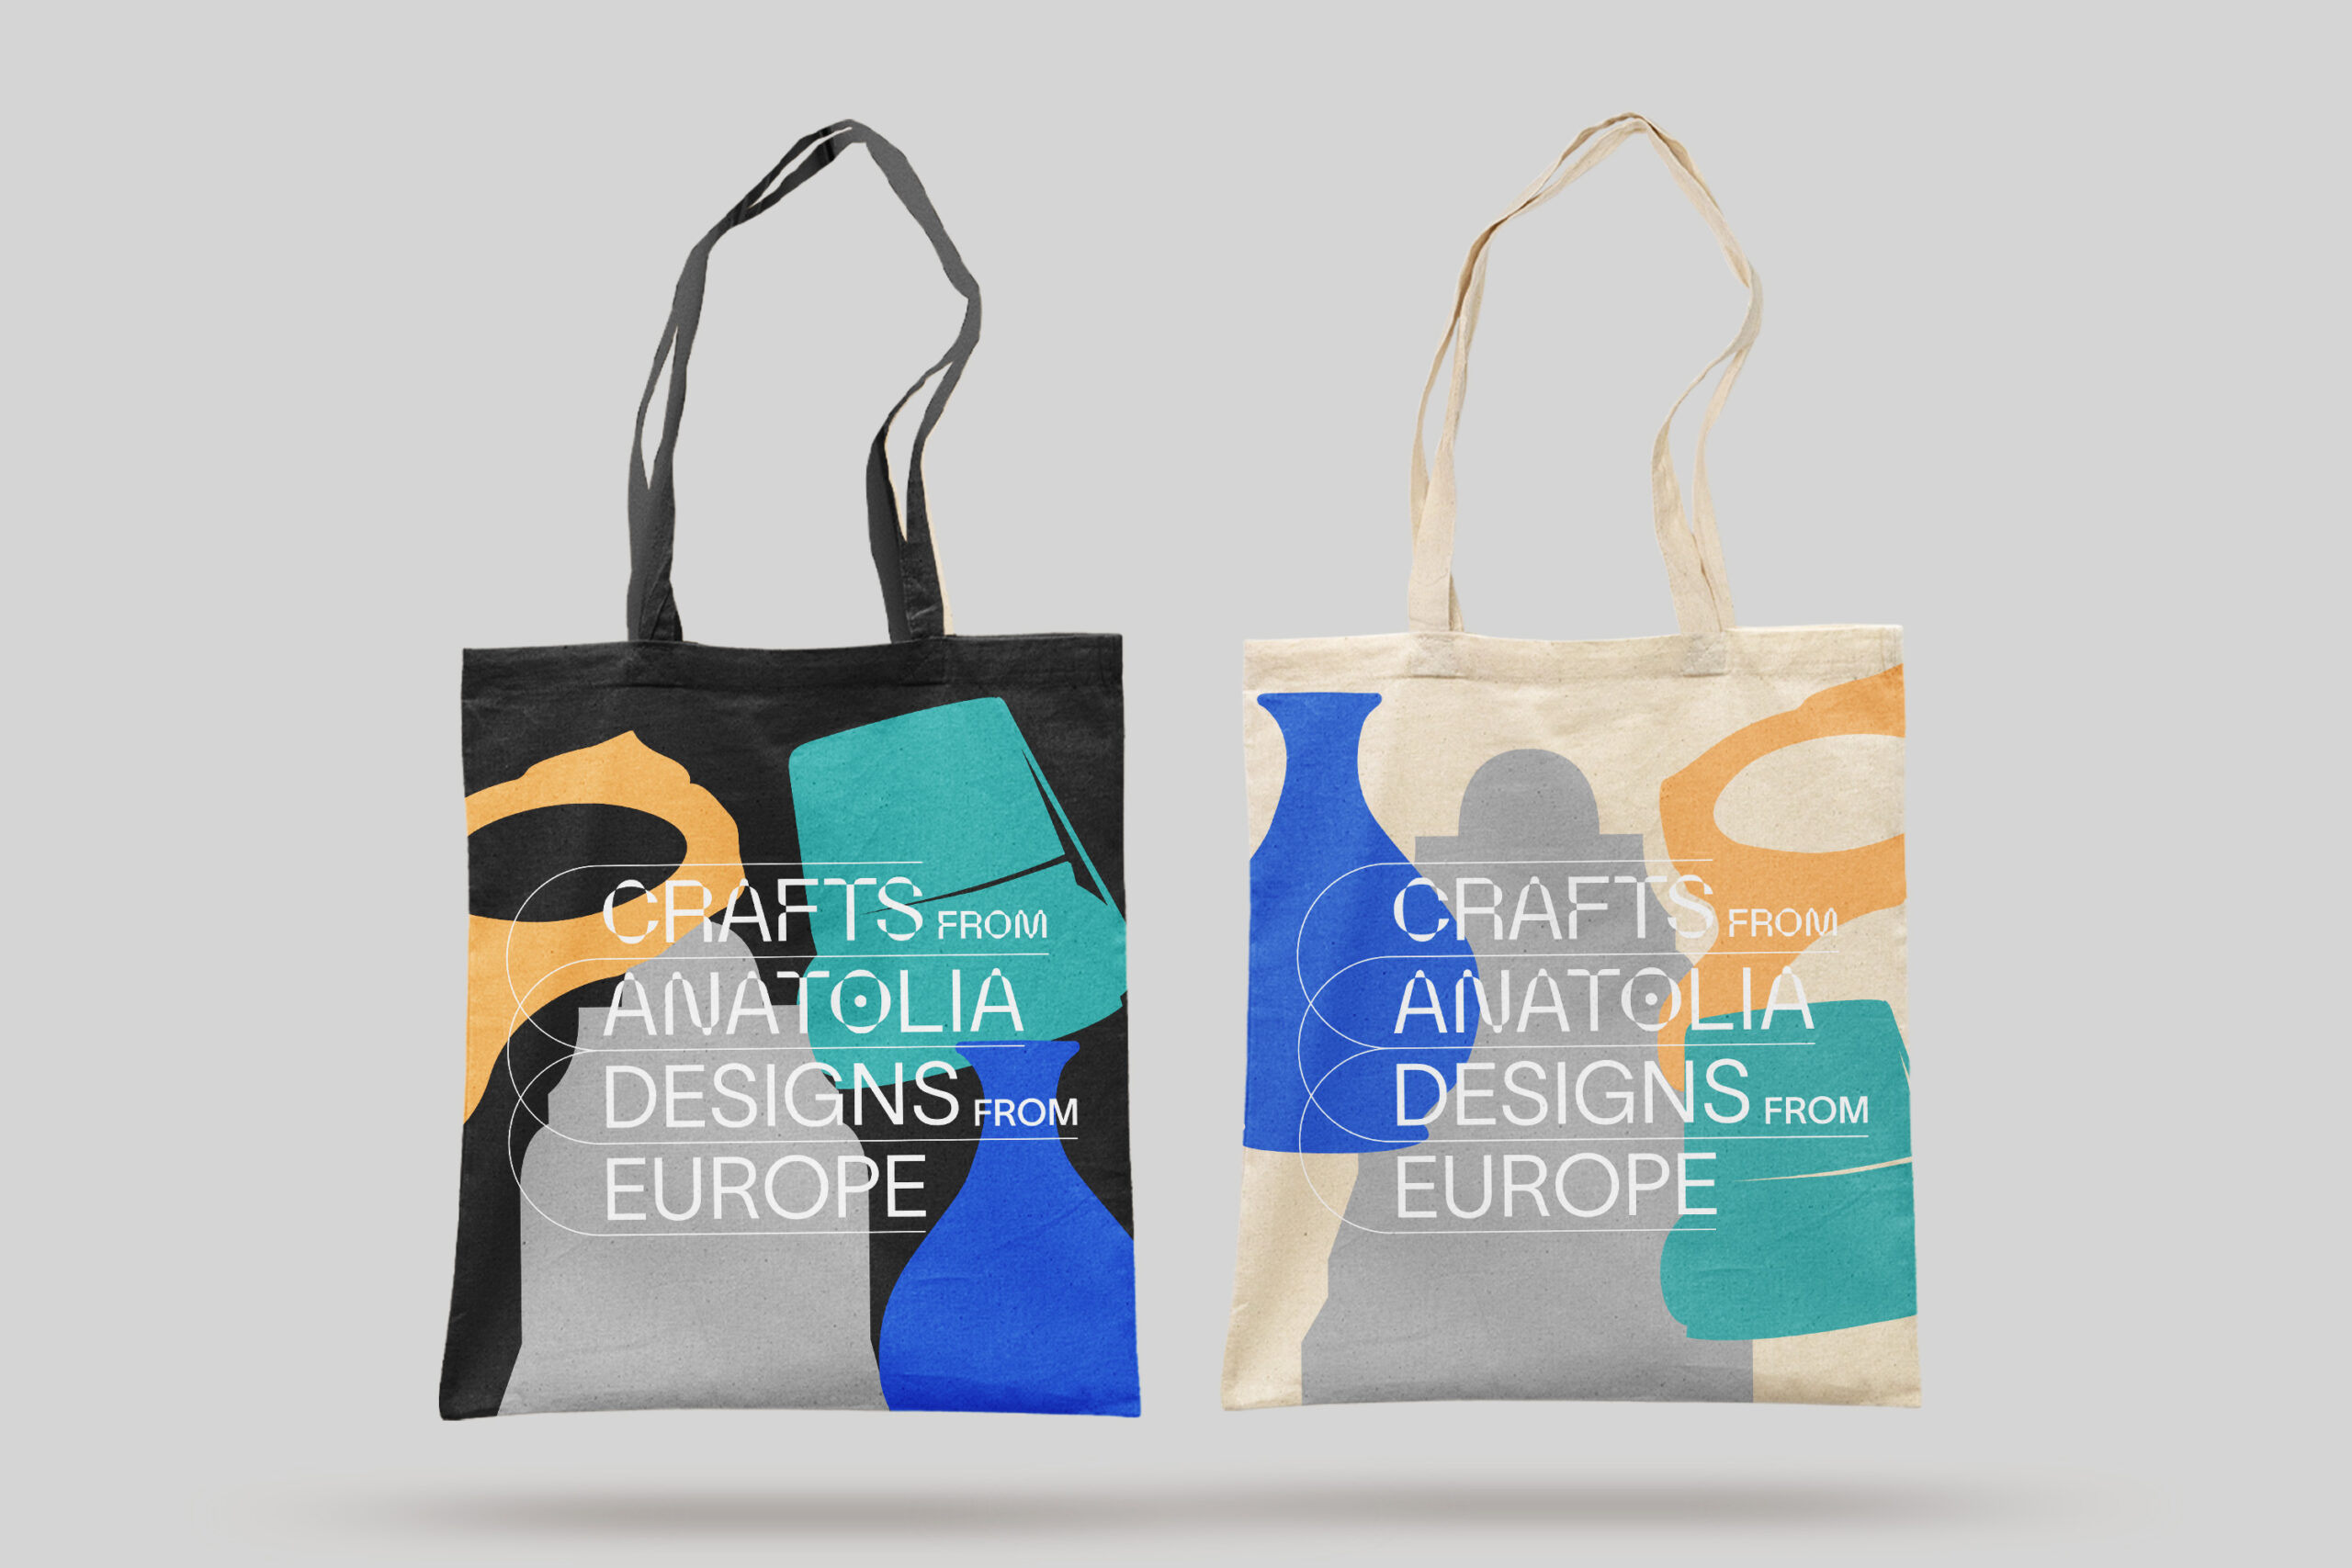 Crafts from Anatolia Design from Europe | Informal Project